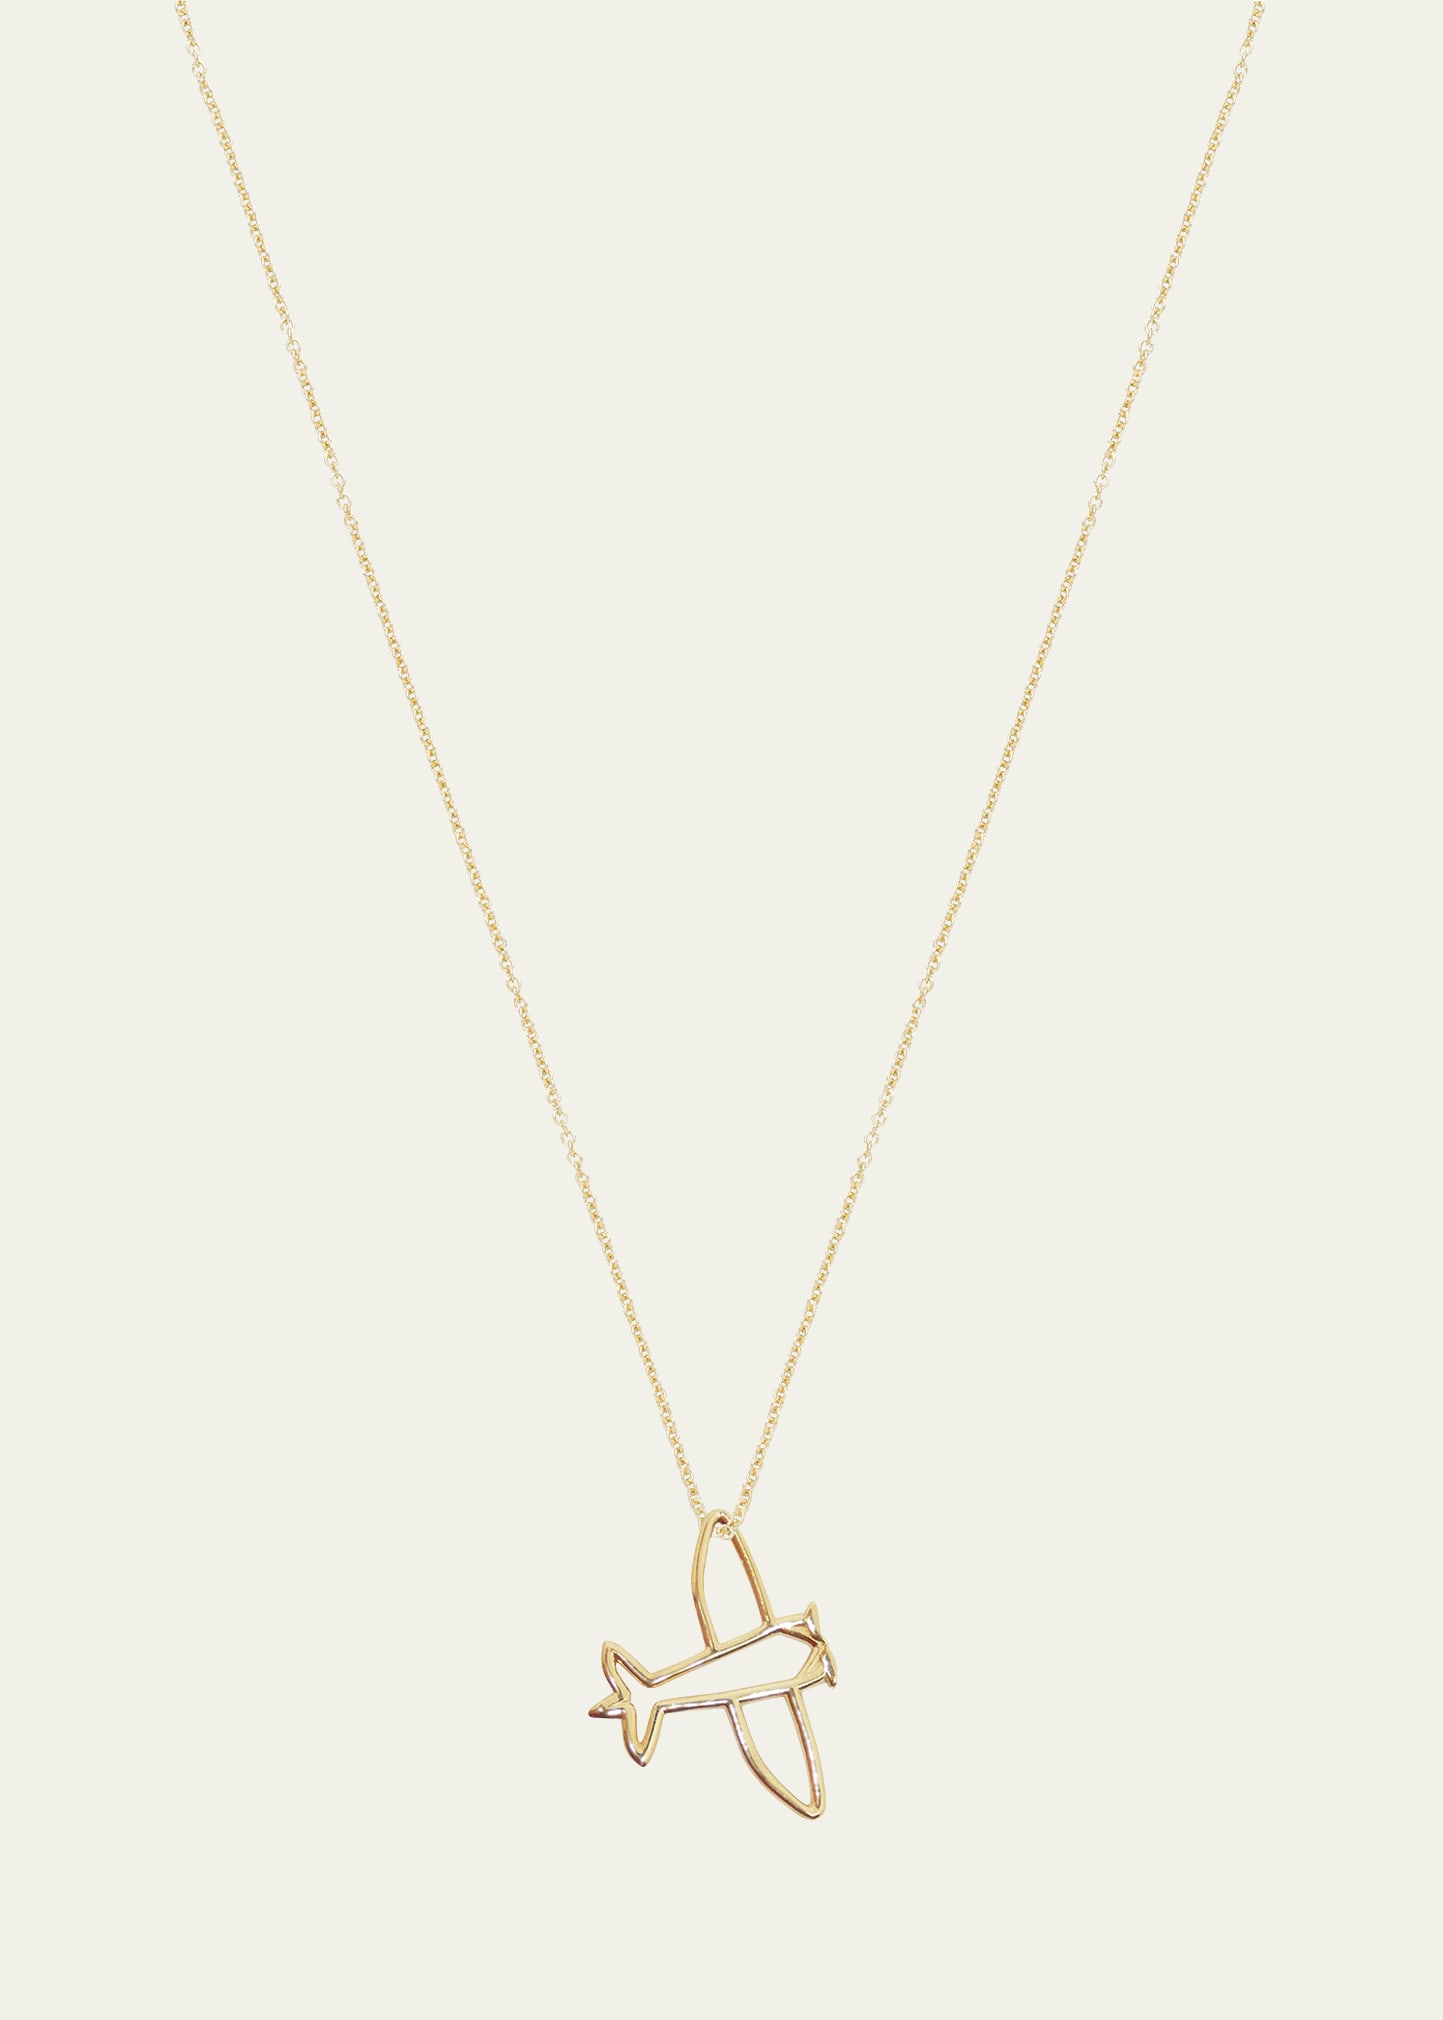 Airplane Necklace in 9K Gold